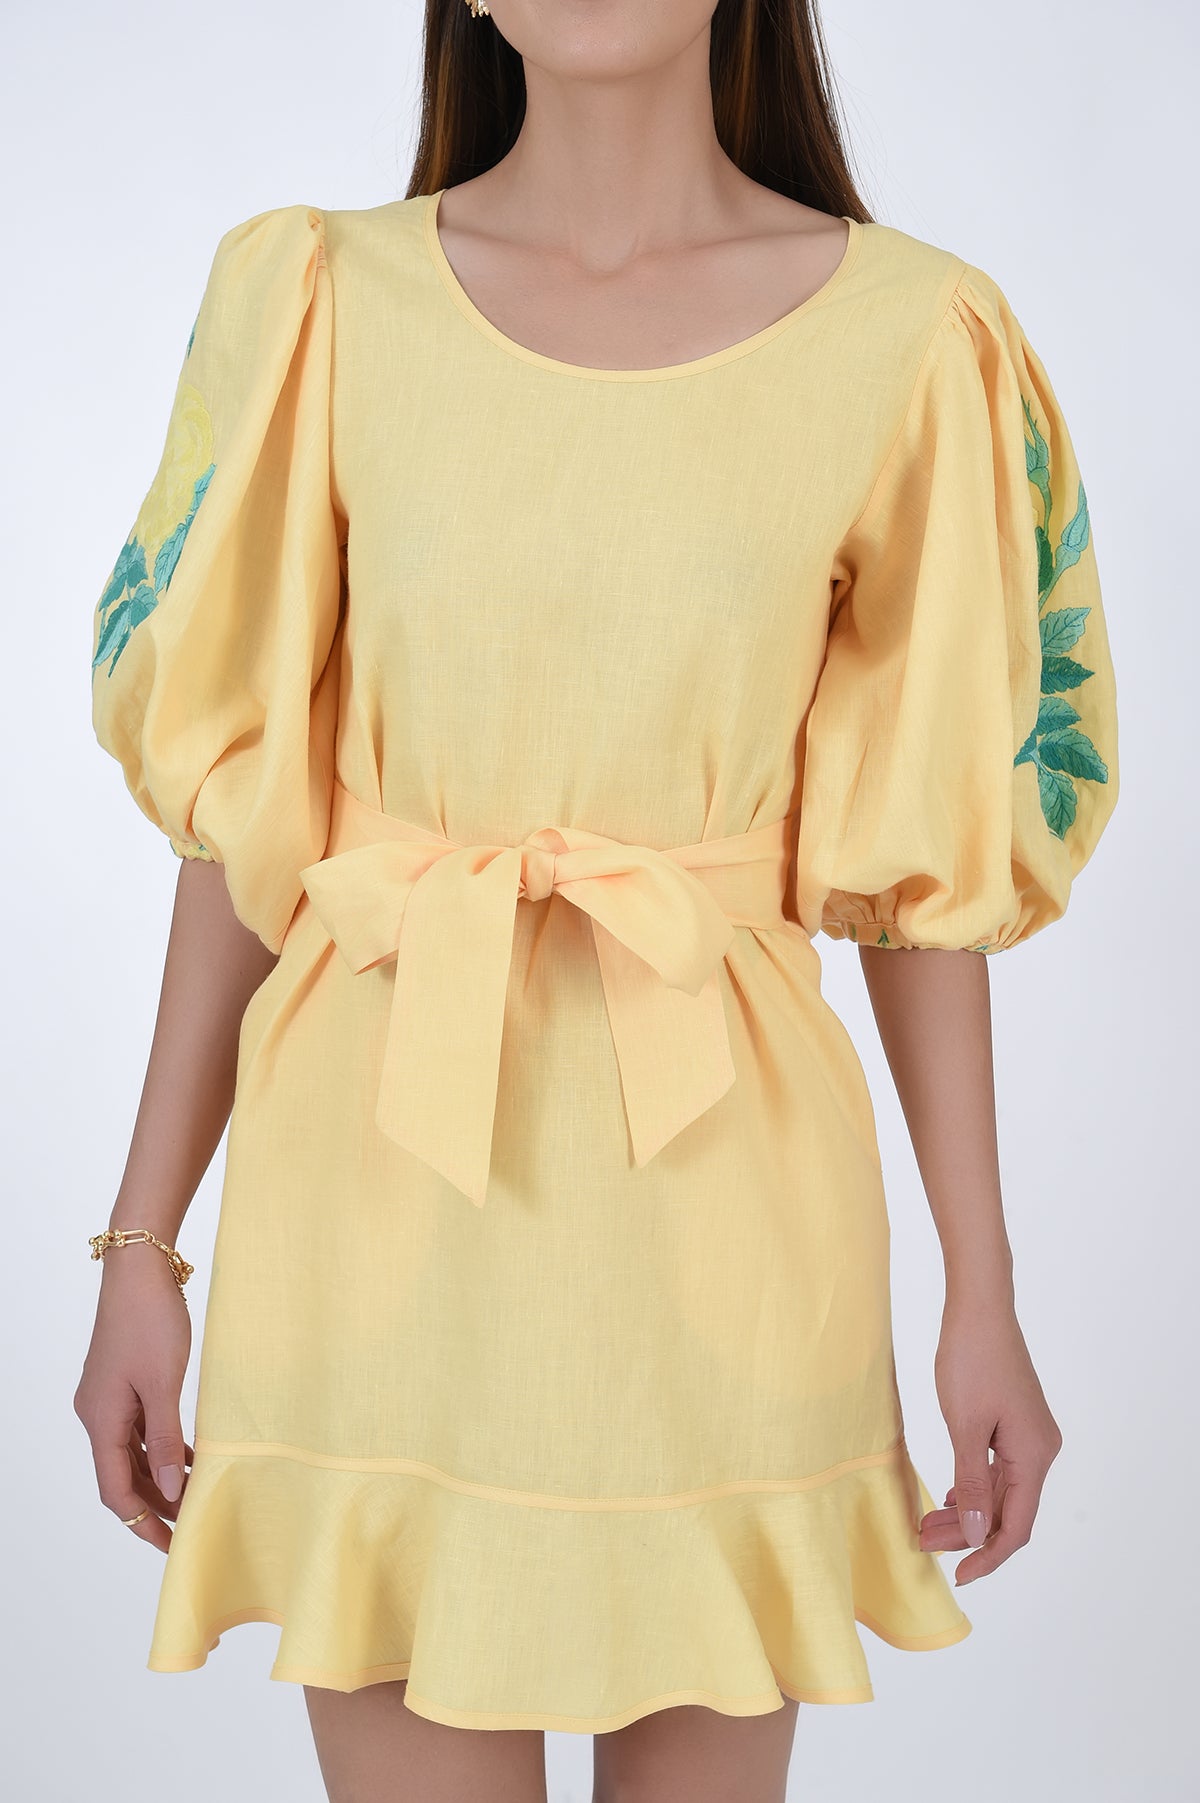 Naril Linen Dress Detail View, showcasing waist belt, ruffle hemline, and sleeves with embroidery detail.